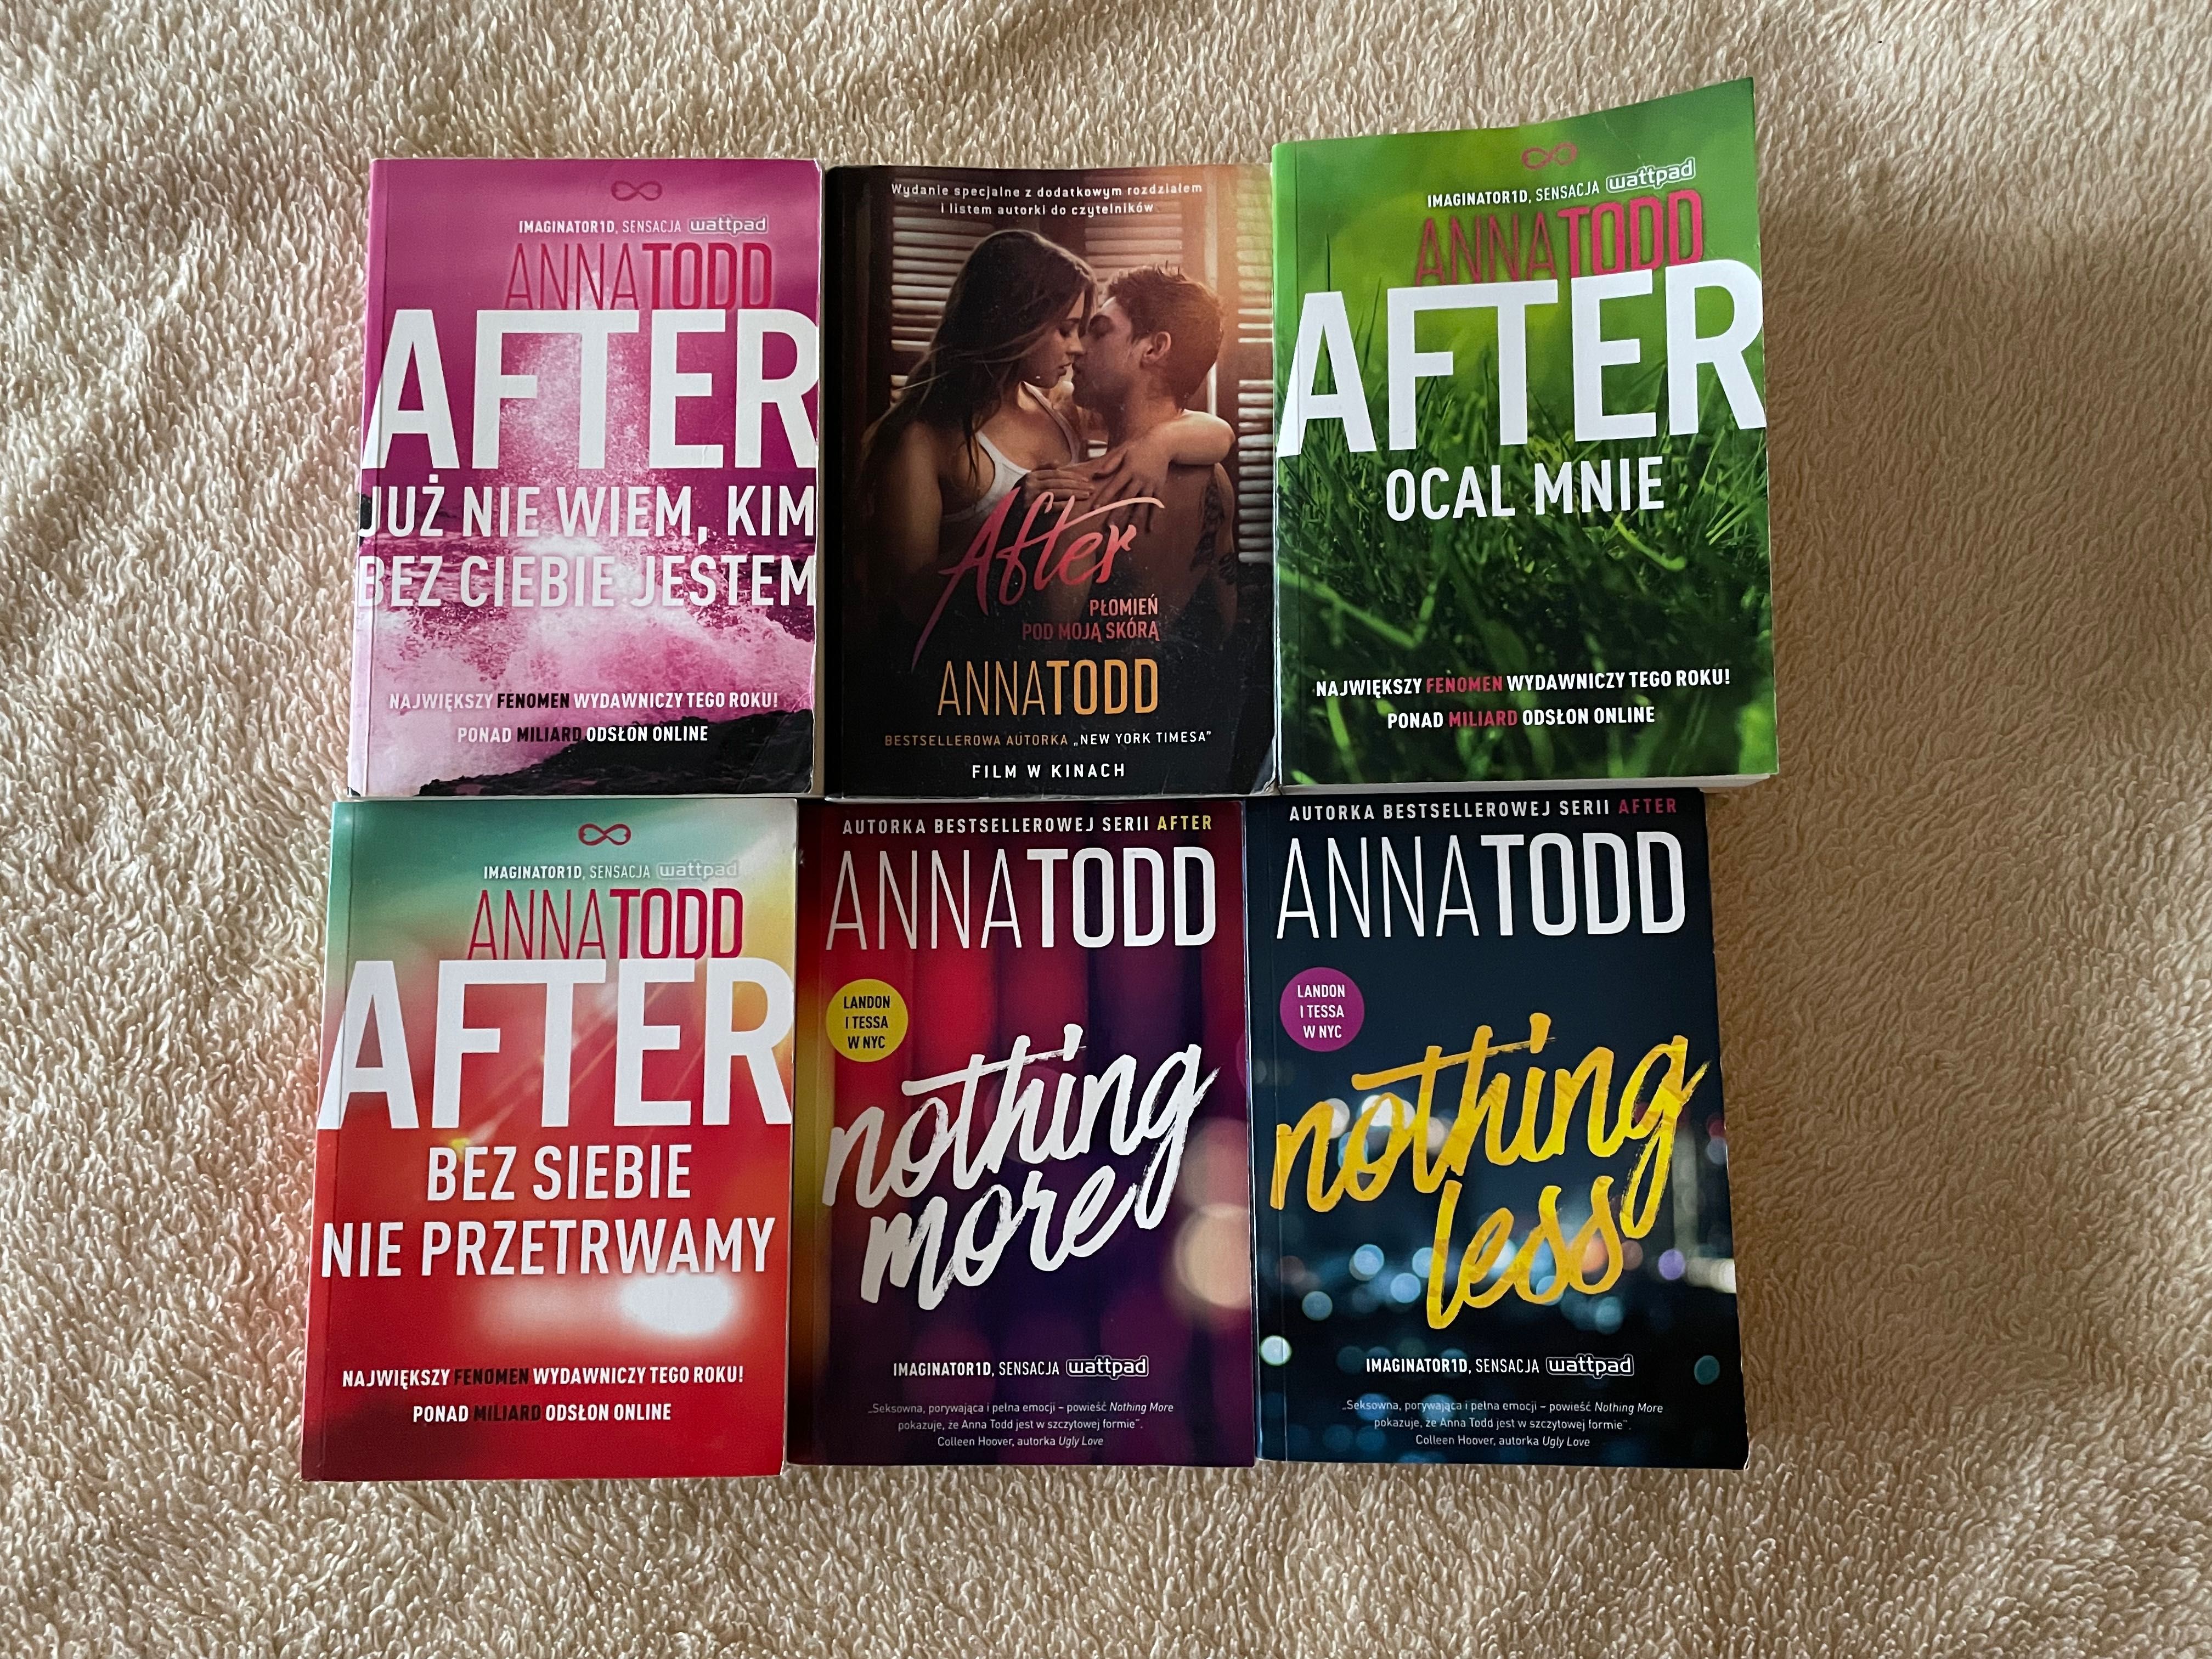 After + Nothing more + Nothing less Anna Todd